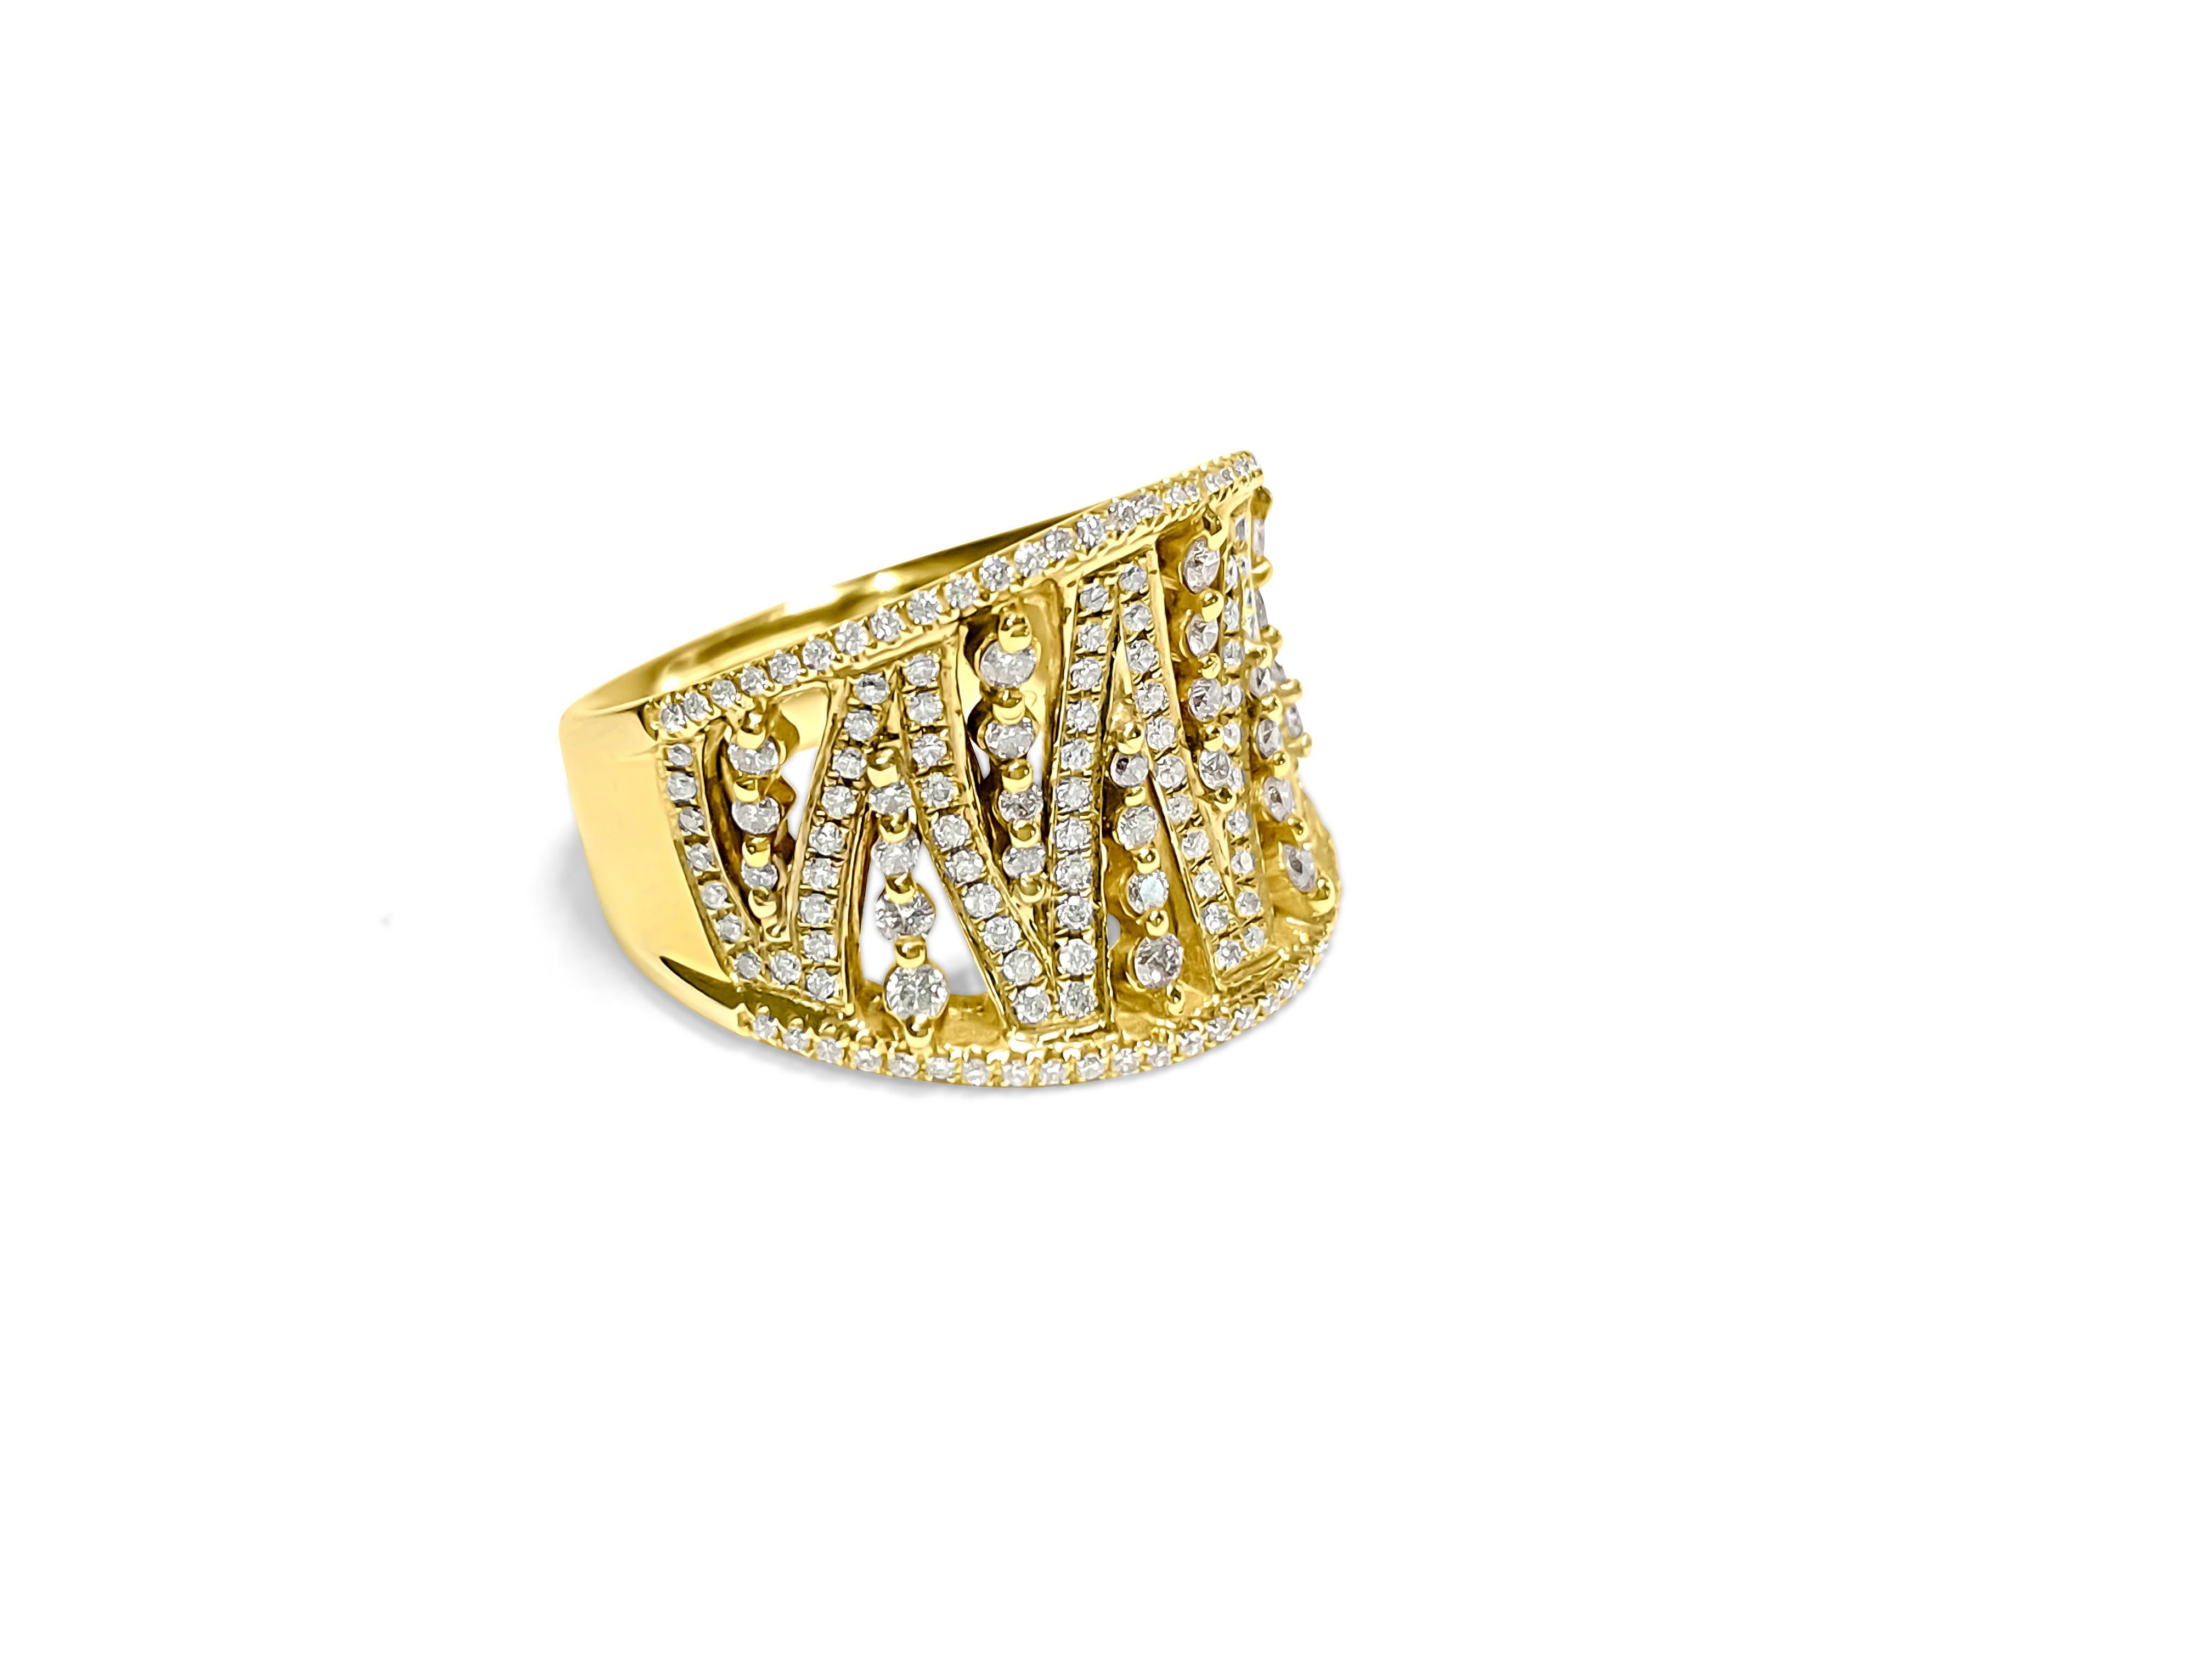 Metal: 18k yellow gold. 
Total carat weight of diamonds: 0.786 carat diamonds. 
VS clarity and G color. 
Round brilliant cut diamonds. 
100% natural earth mined diamonds. 
Ring resizing available
Womens modern diamond gold band.  